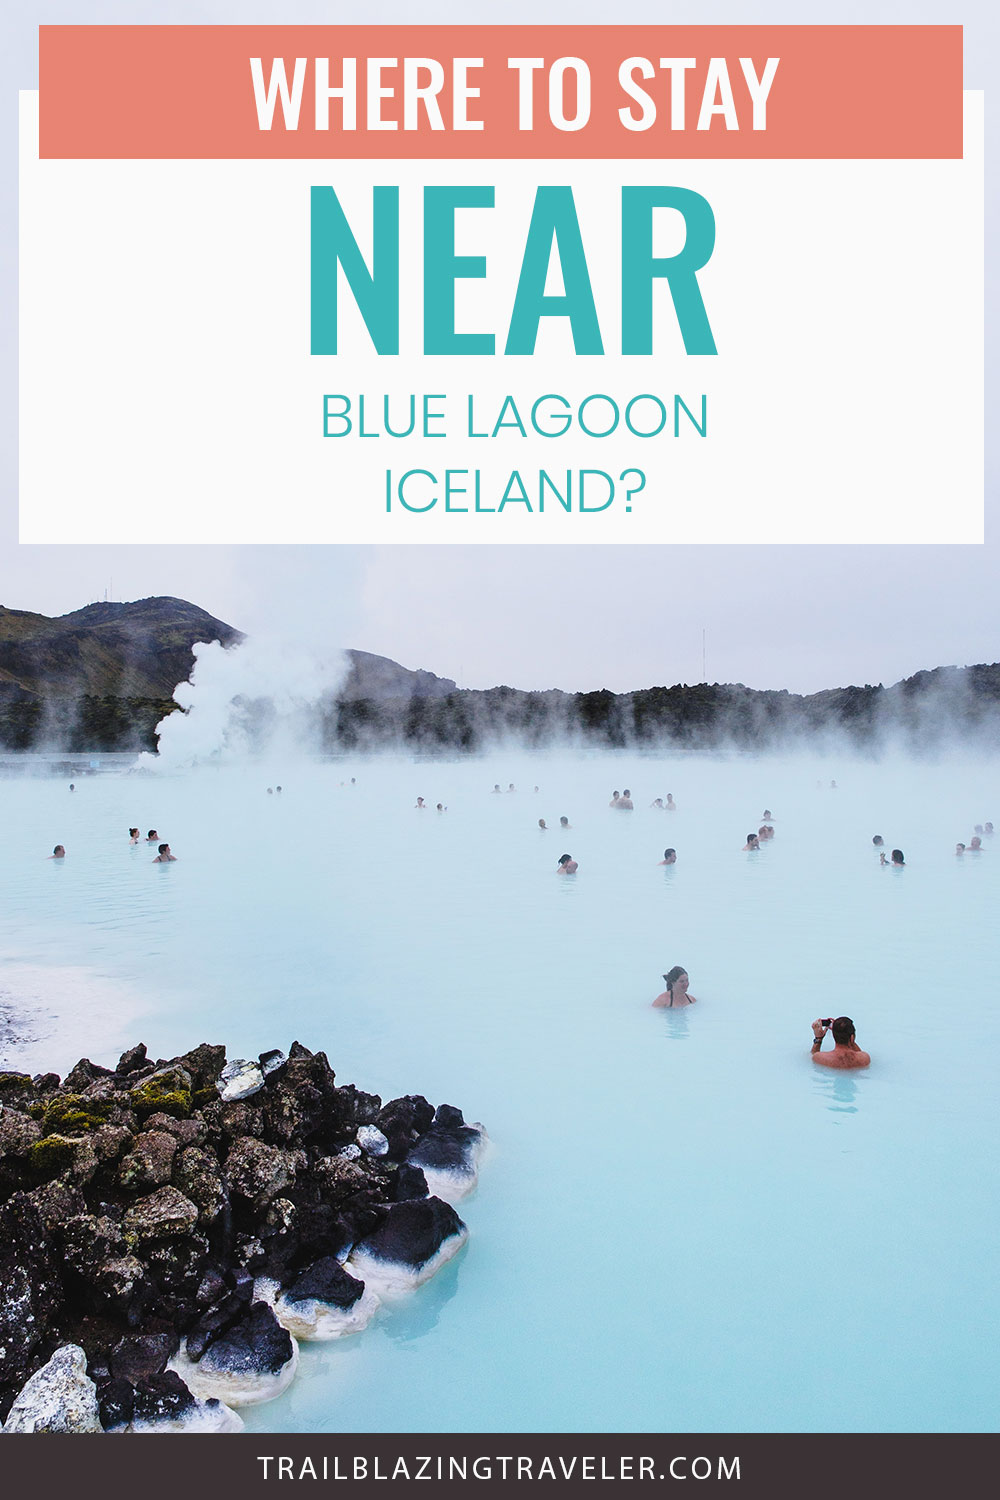 Many people in the Blue Lagoon in Iceland - Where to stay near this place?